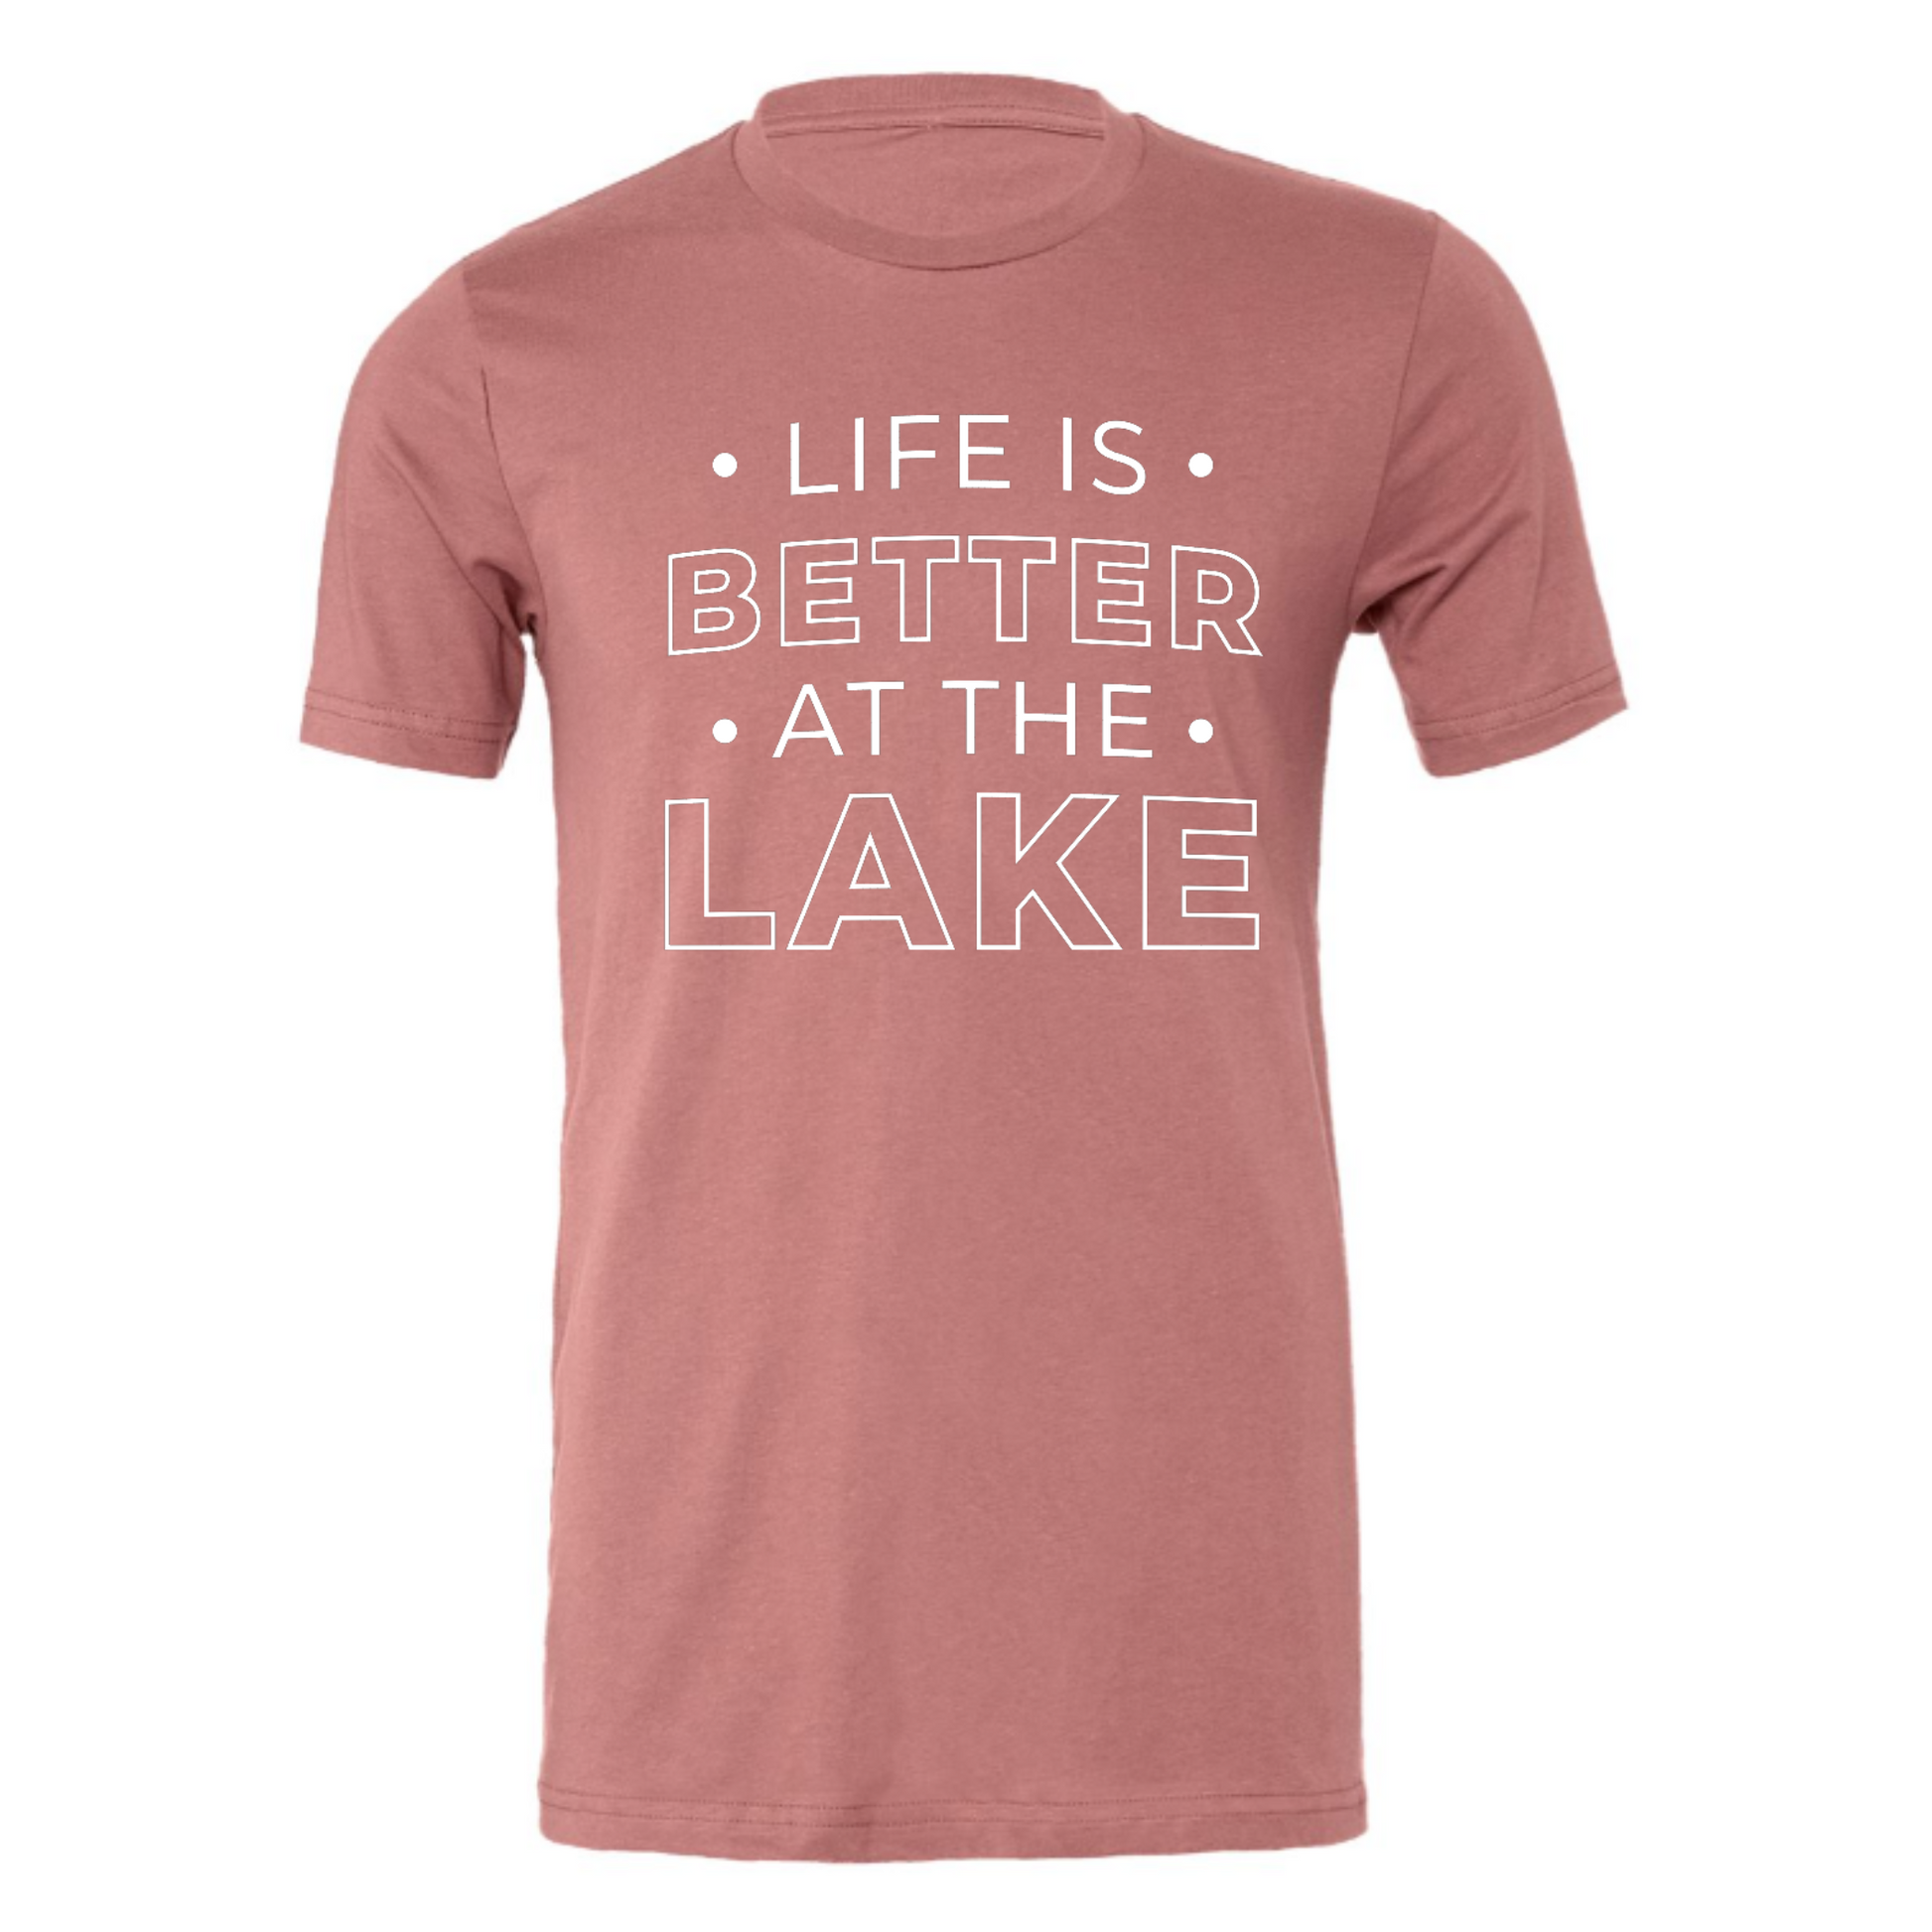 Life Is Better By The Lake - T-Shirt in Mauve with white writing - front view